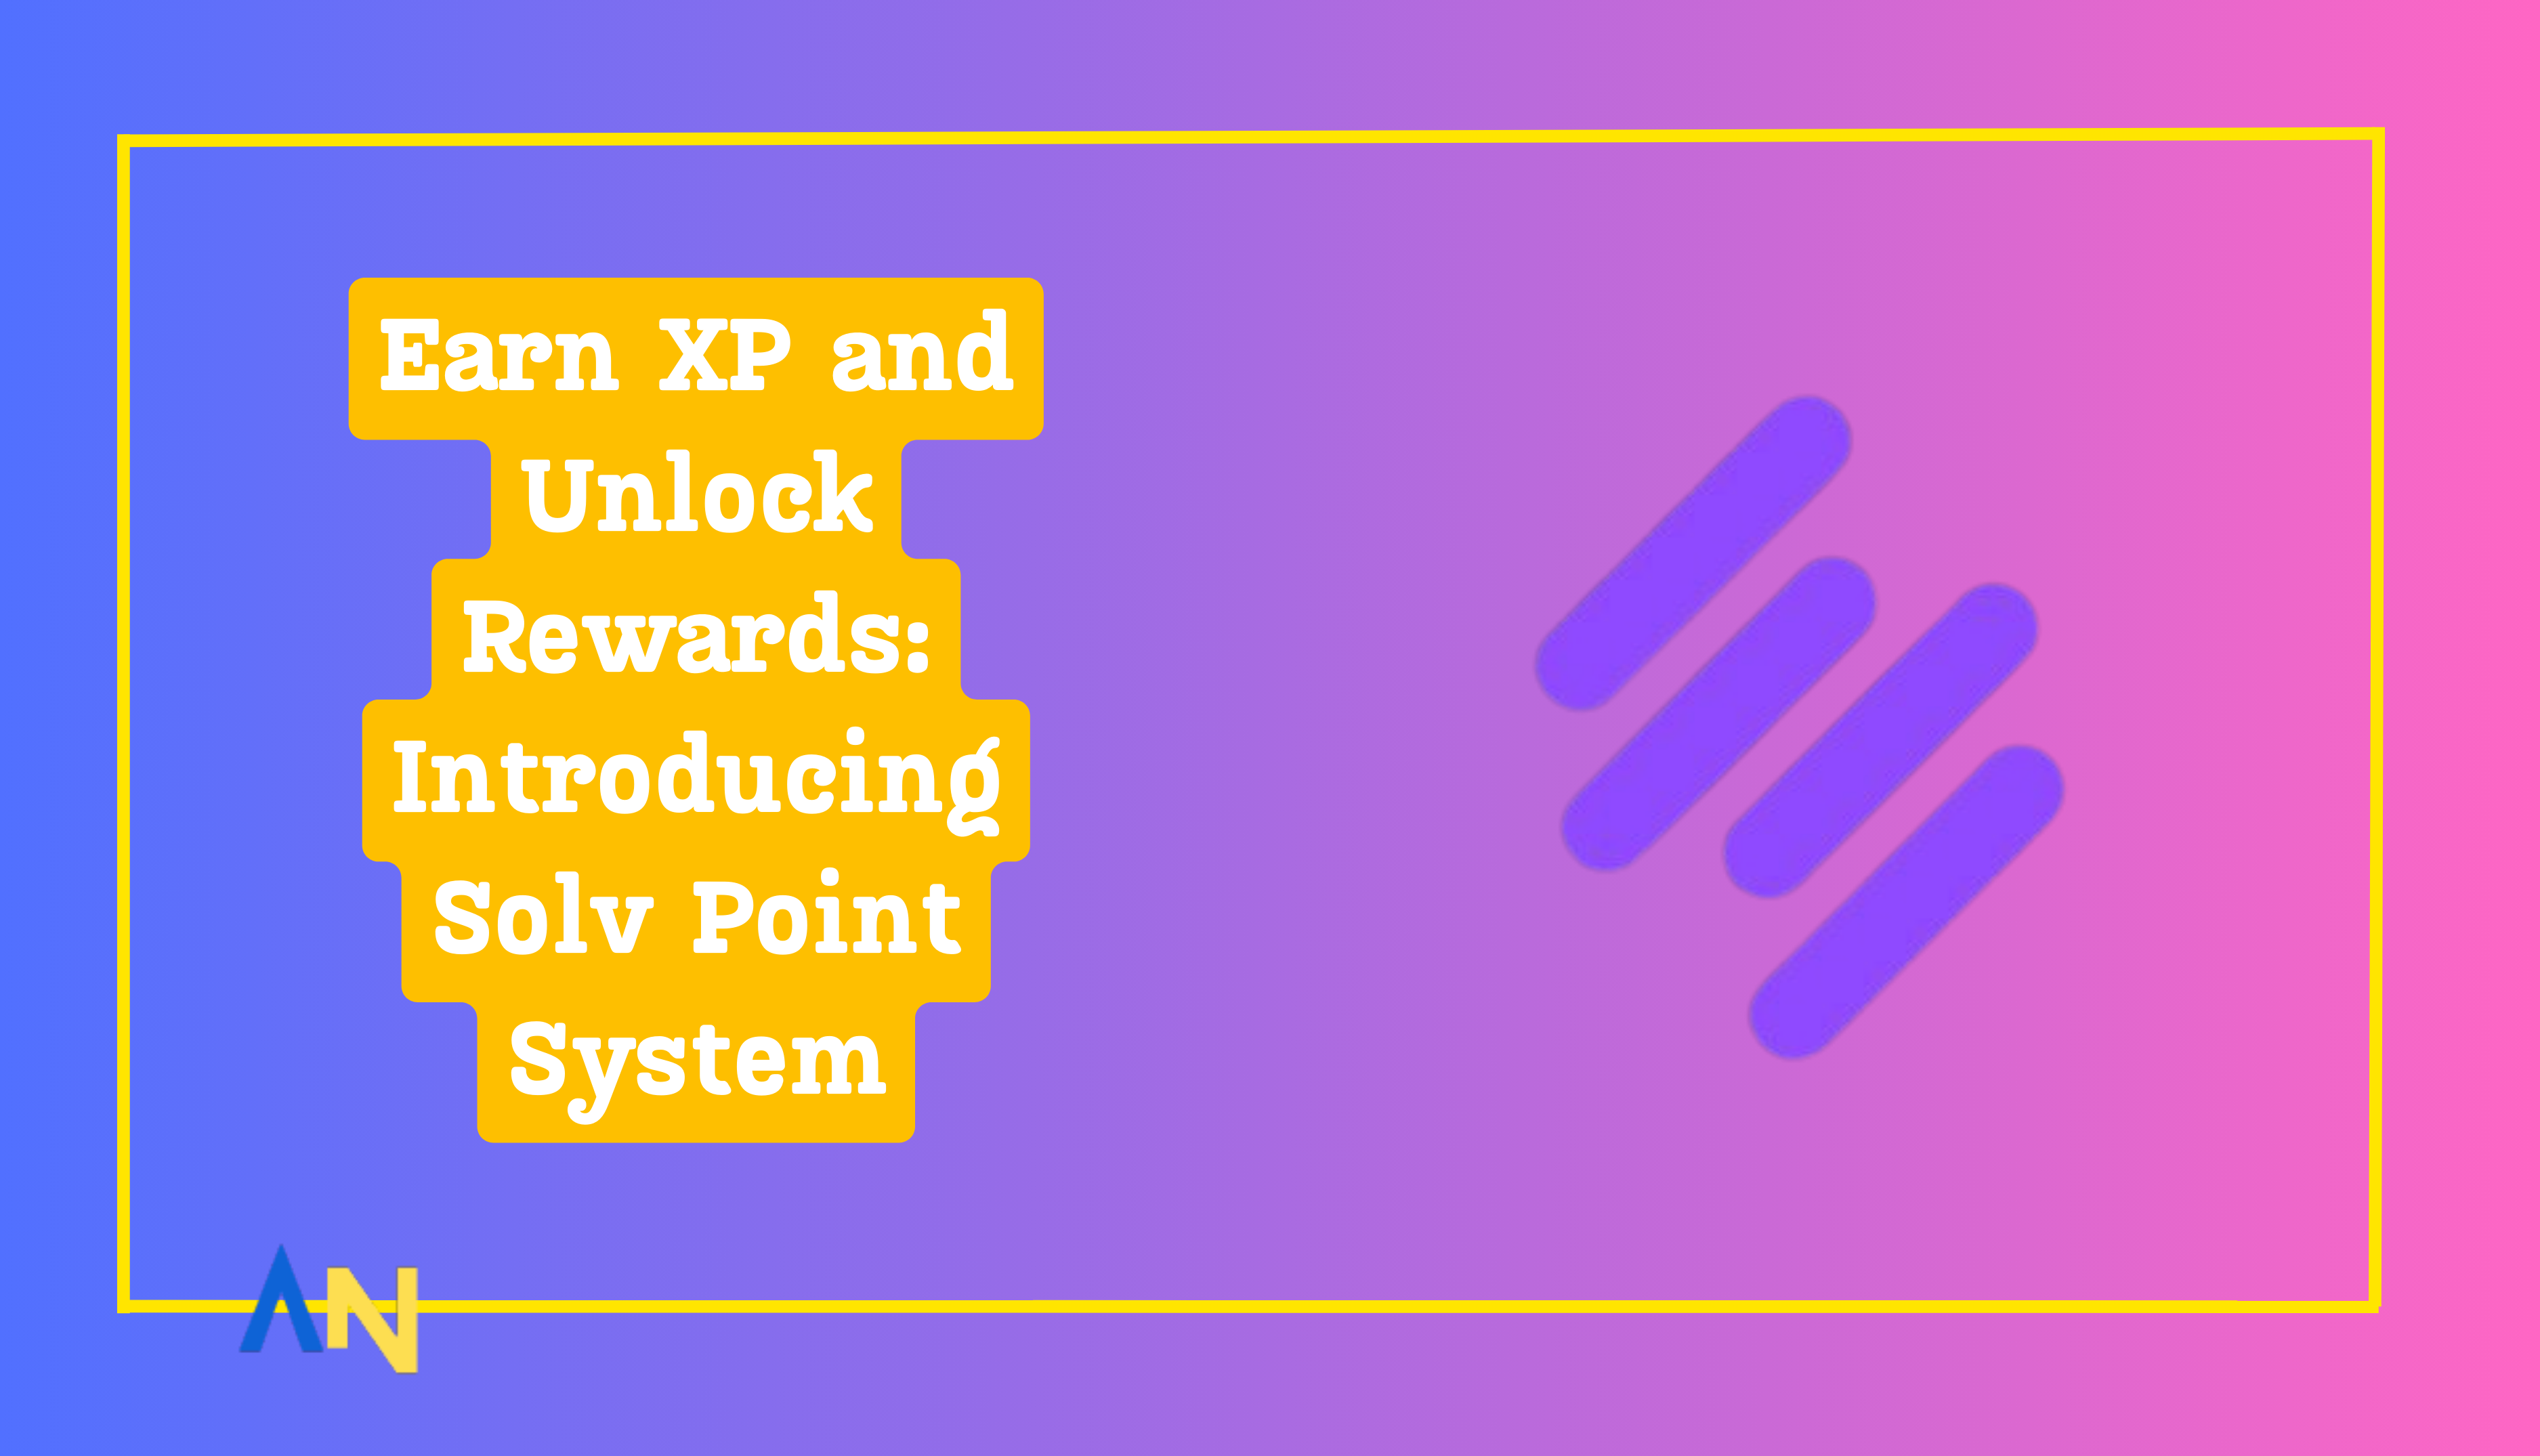 Earn XP and Unlock Rewards Introducing Solv Point System